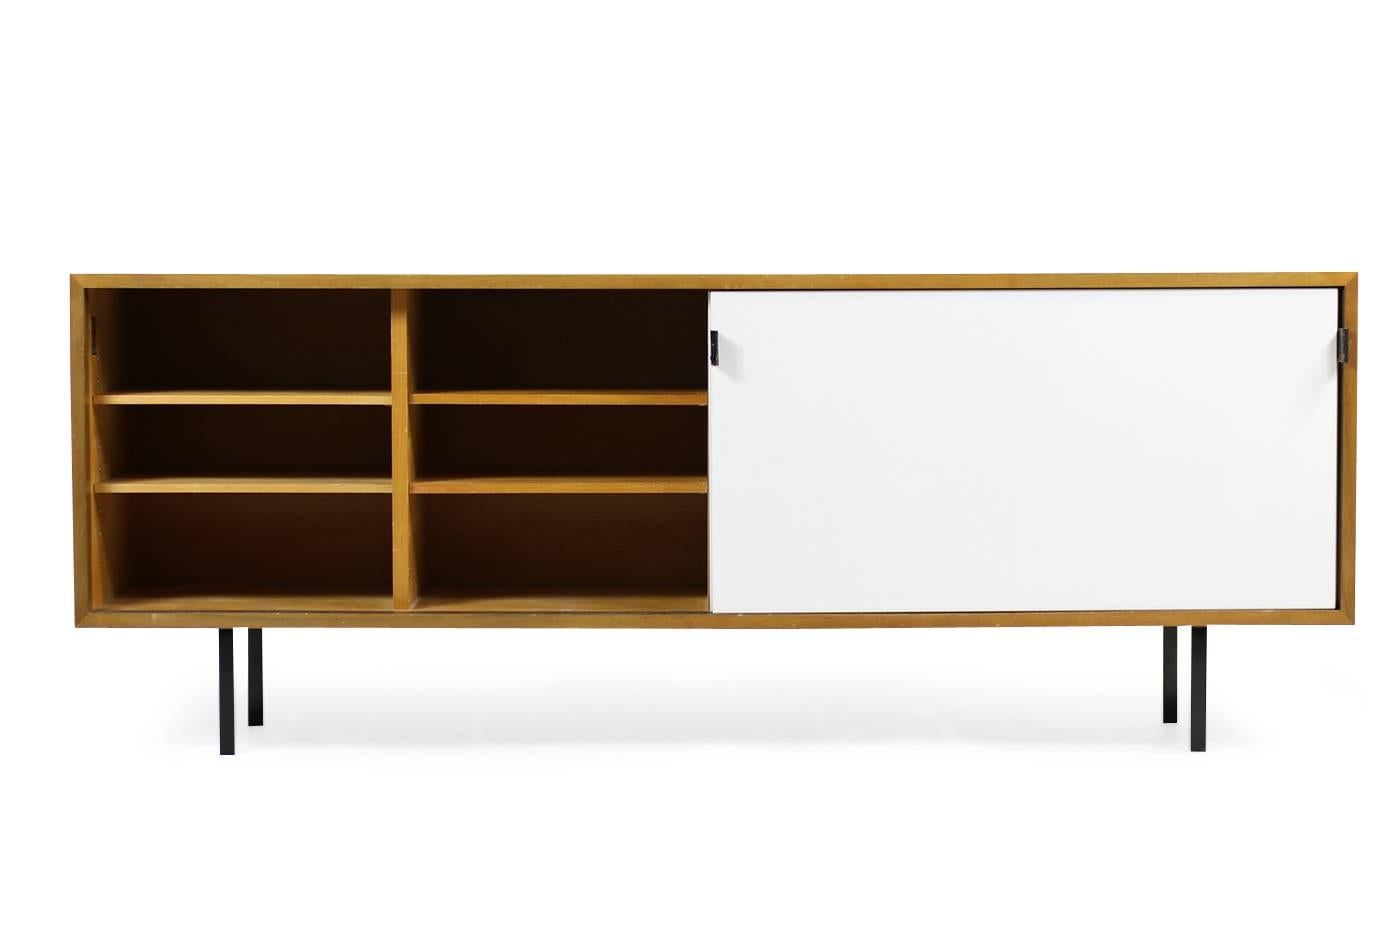 Beautiful, Florence Knoll sideboard Mod. 116 for Knoll International, manufactured for Knoll for Wohnbedarf S.A Switzerland in the 1950s.
Fantastic condition, adjustable shelves inside, cherrywood and maplewood. Metal legs, leather handles with